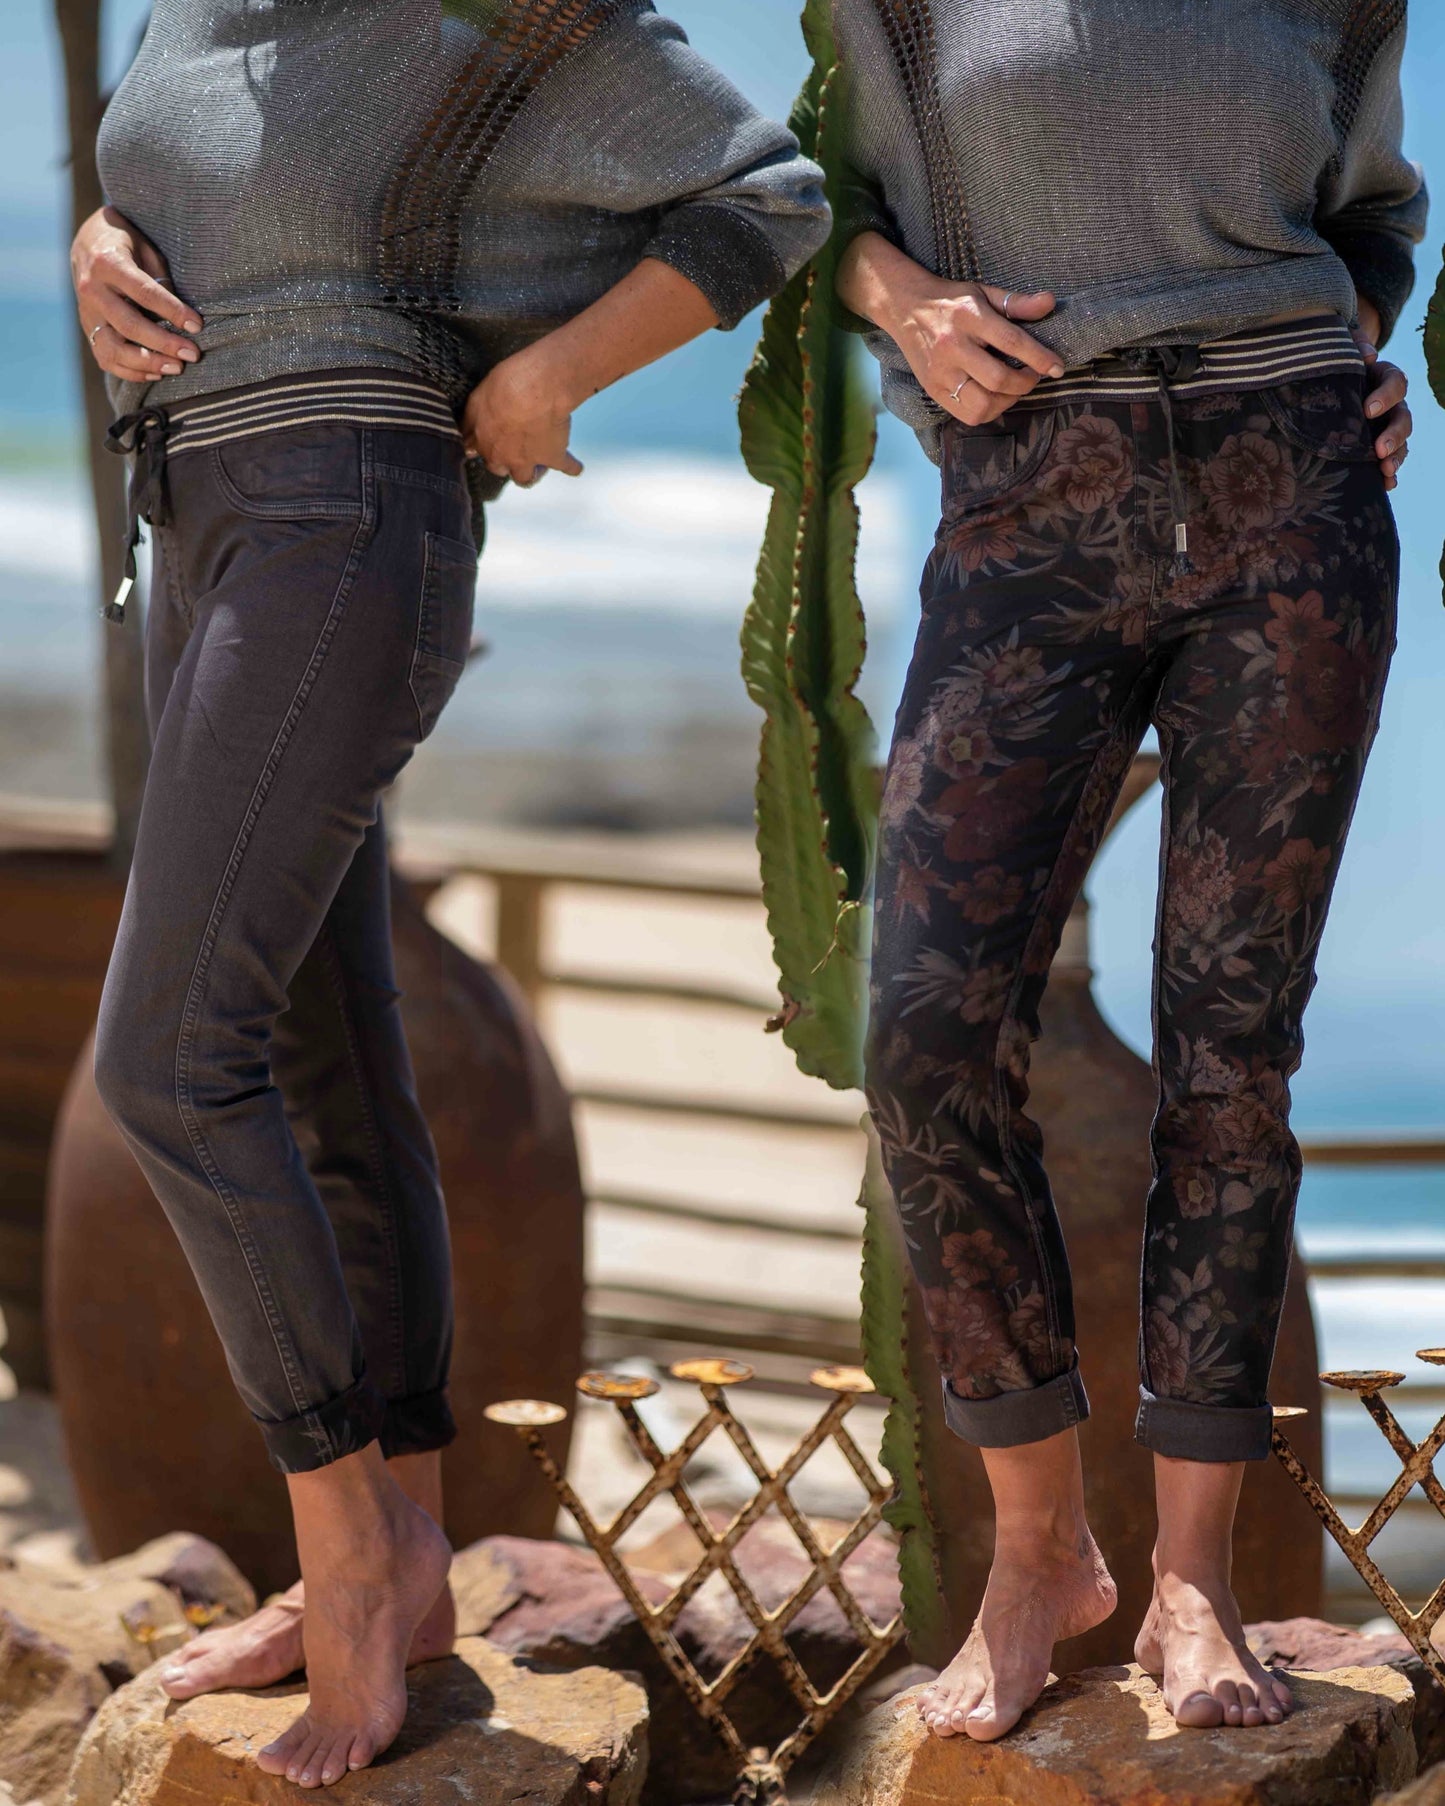 A single pair of Drawstring elasticated pants that effortlessly transitions from bold floral elegance to sleek block color, ensuring you're always ready for any fashion mood. On one side, embrace the vibrant beauty of nature with our eye-catching floral print. On the flip side, revel in the simplicity and sophistication of the block color design